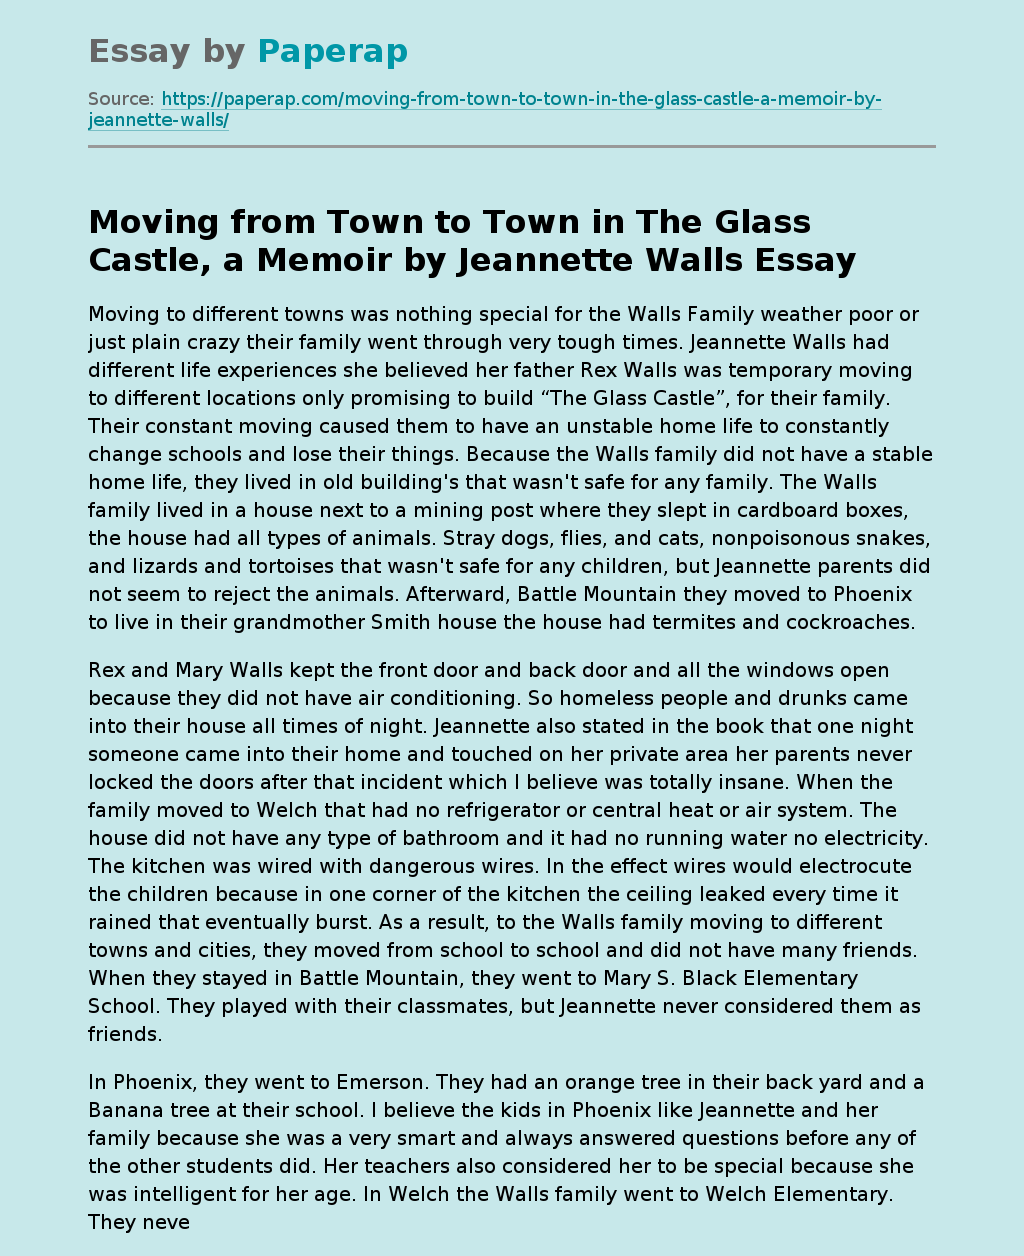 Moving from Town to Town in The Glass Castle, a Memoir by Jeannette Walls